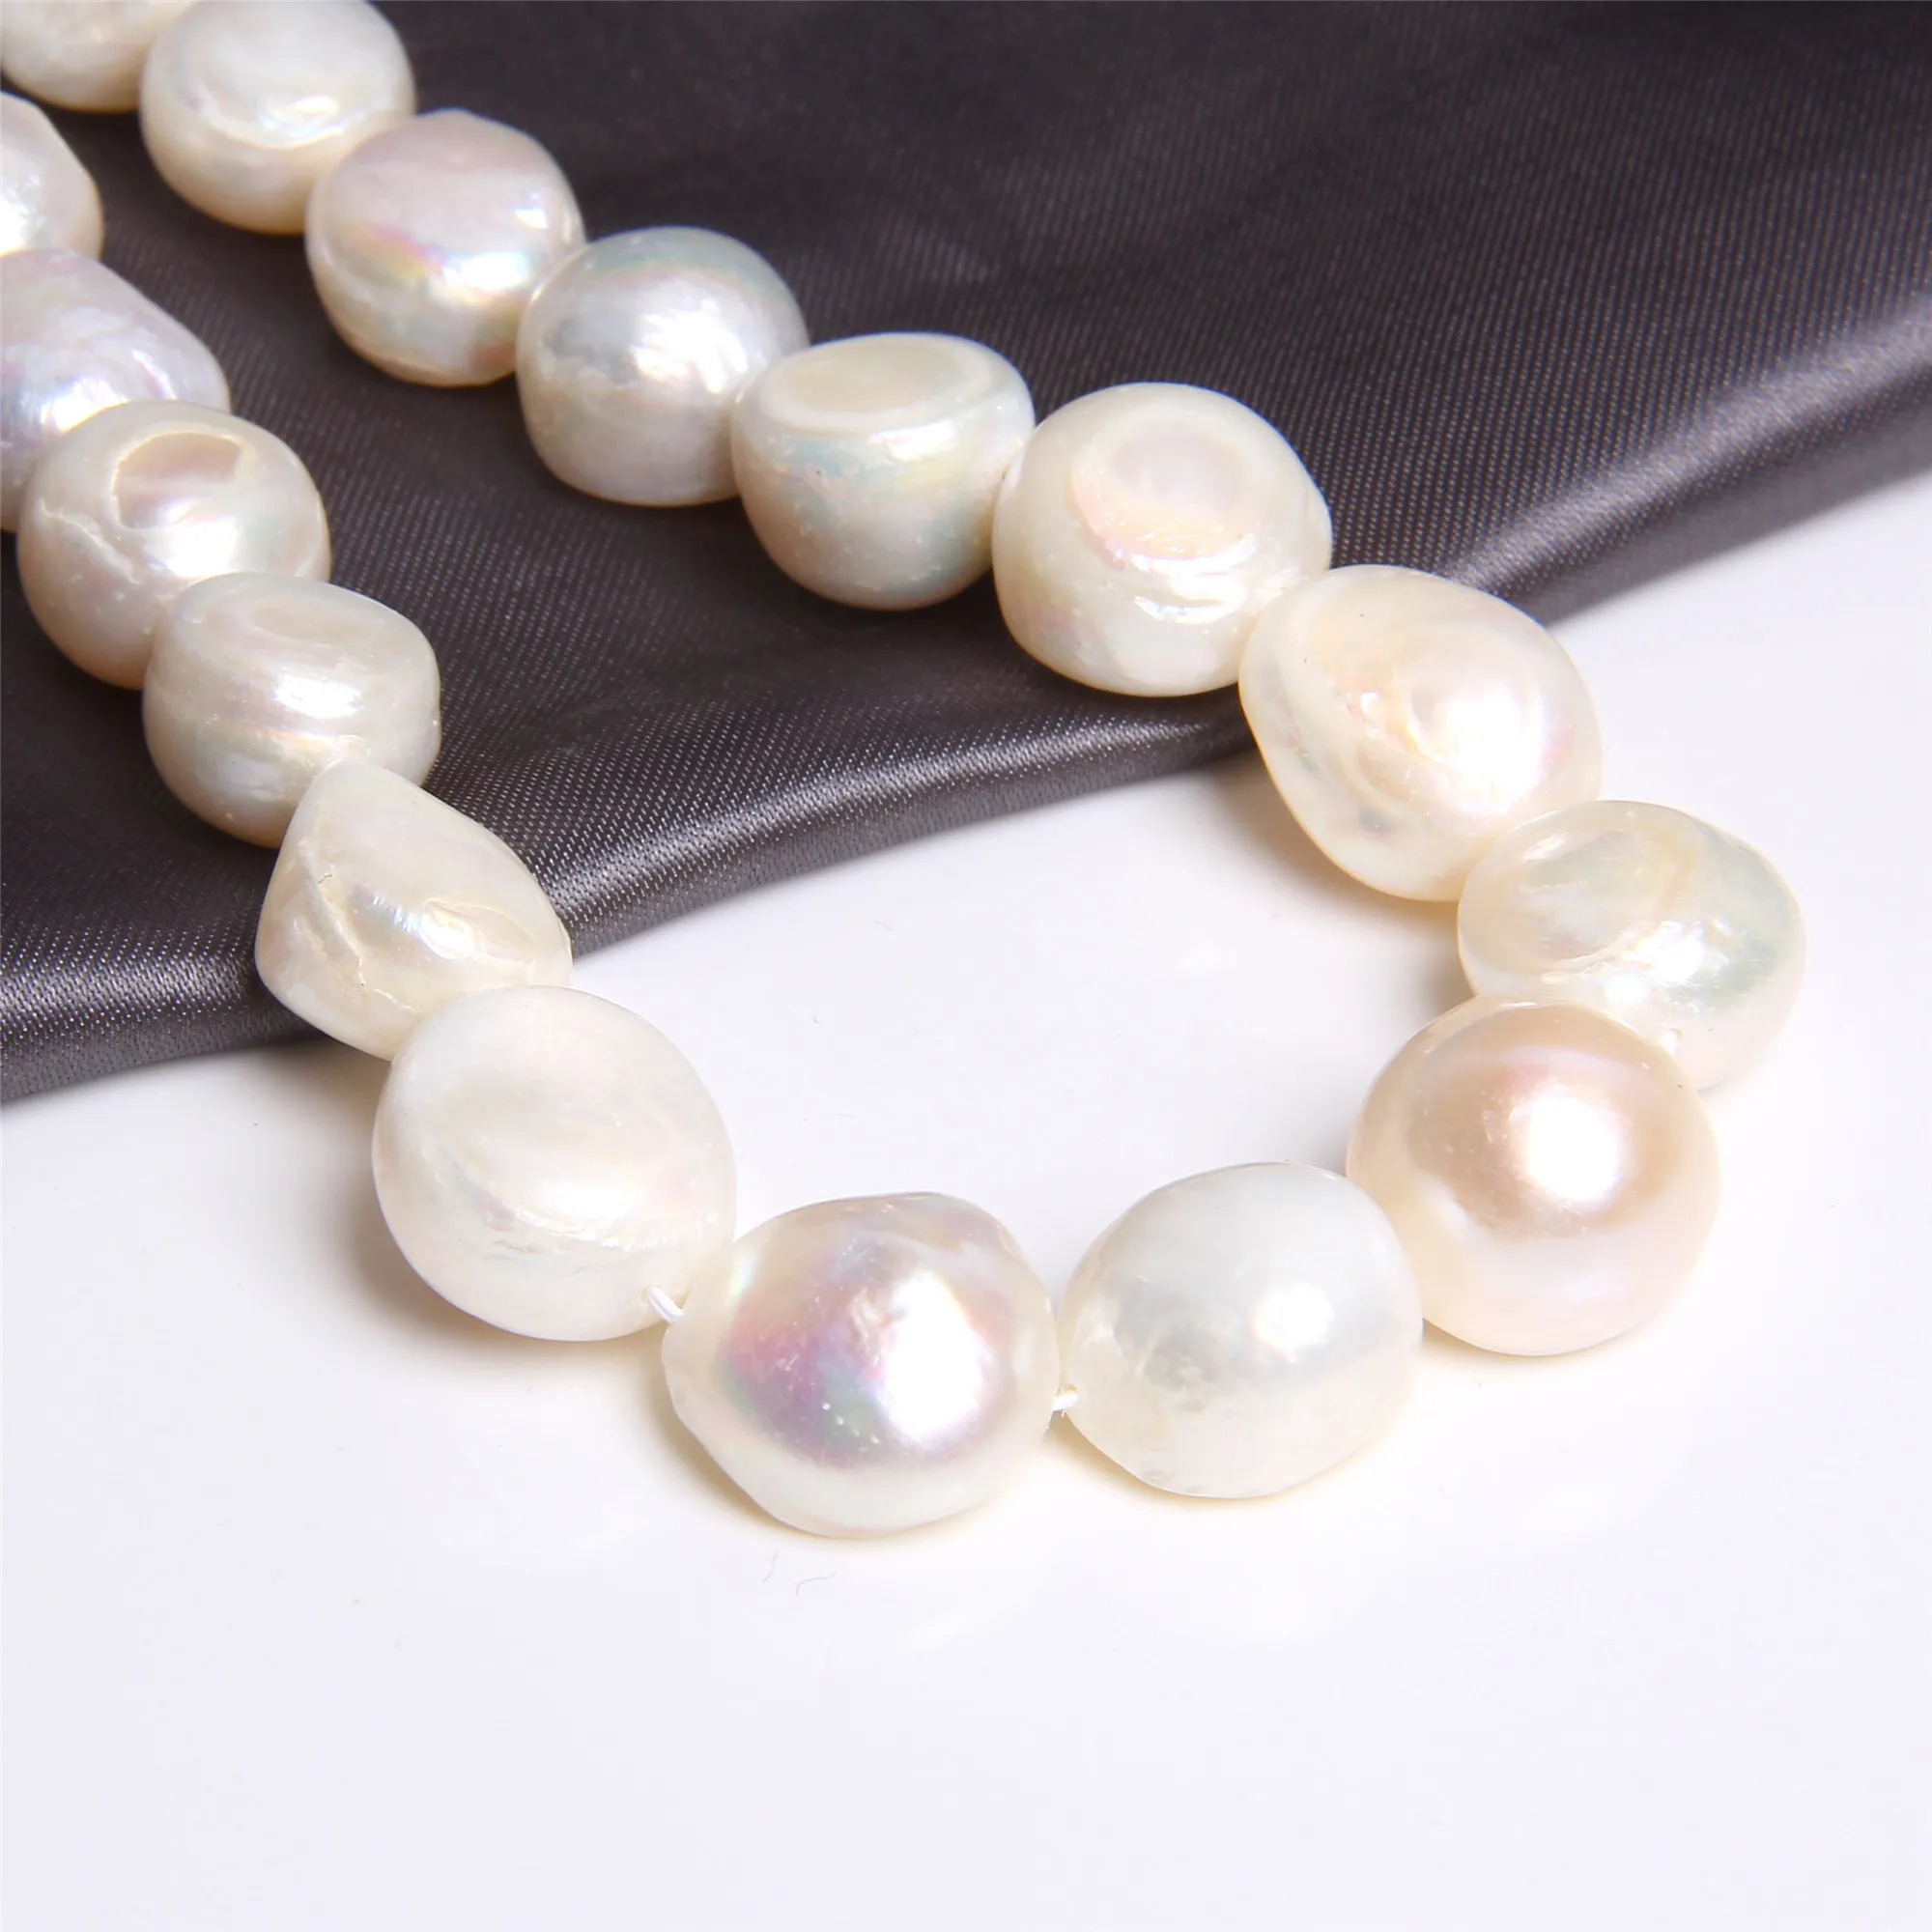 

12-13mm Real Natural Baroque Pearls Big Freshwater Pearl Beads Potato Lump Shape Loose Pearl Beads For Jewelry Making DIY 14"